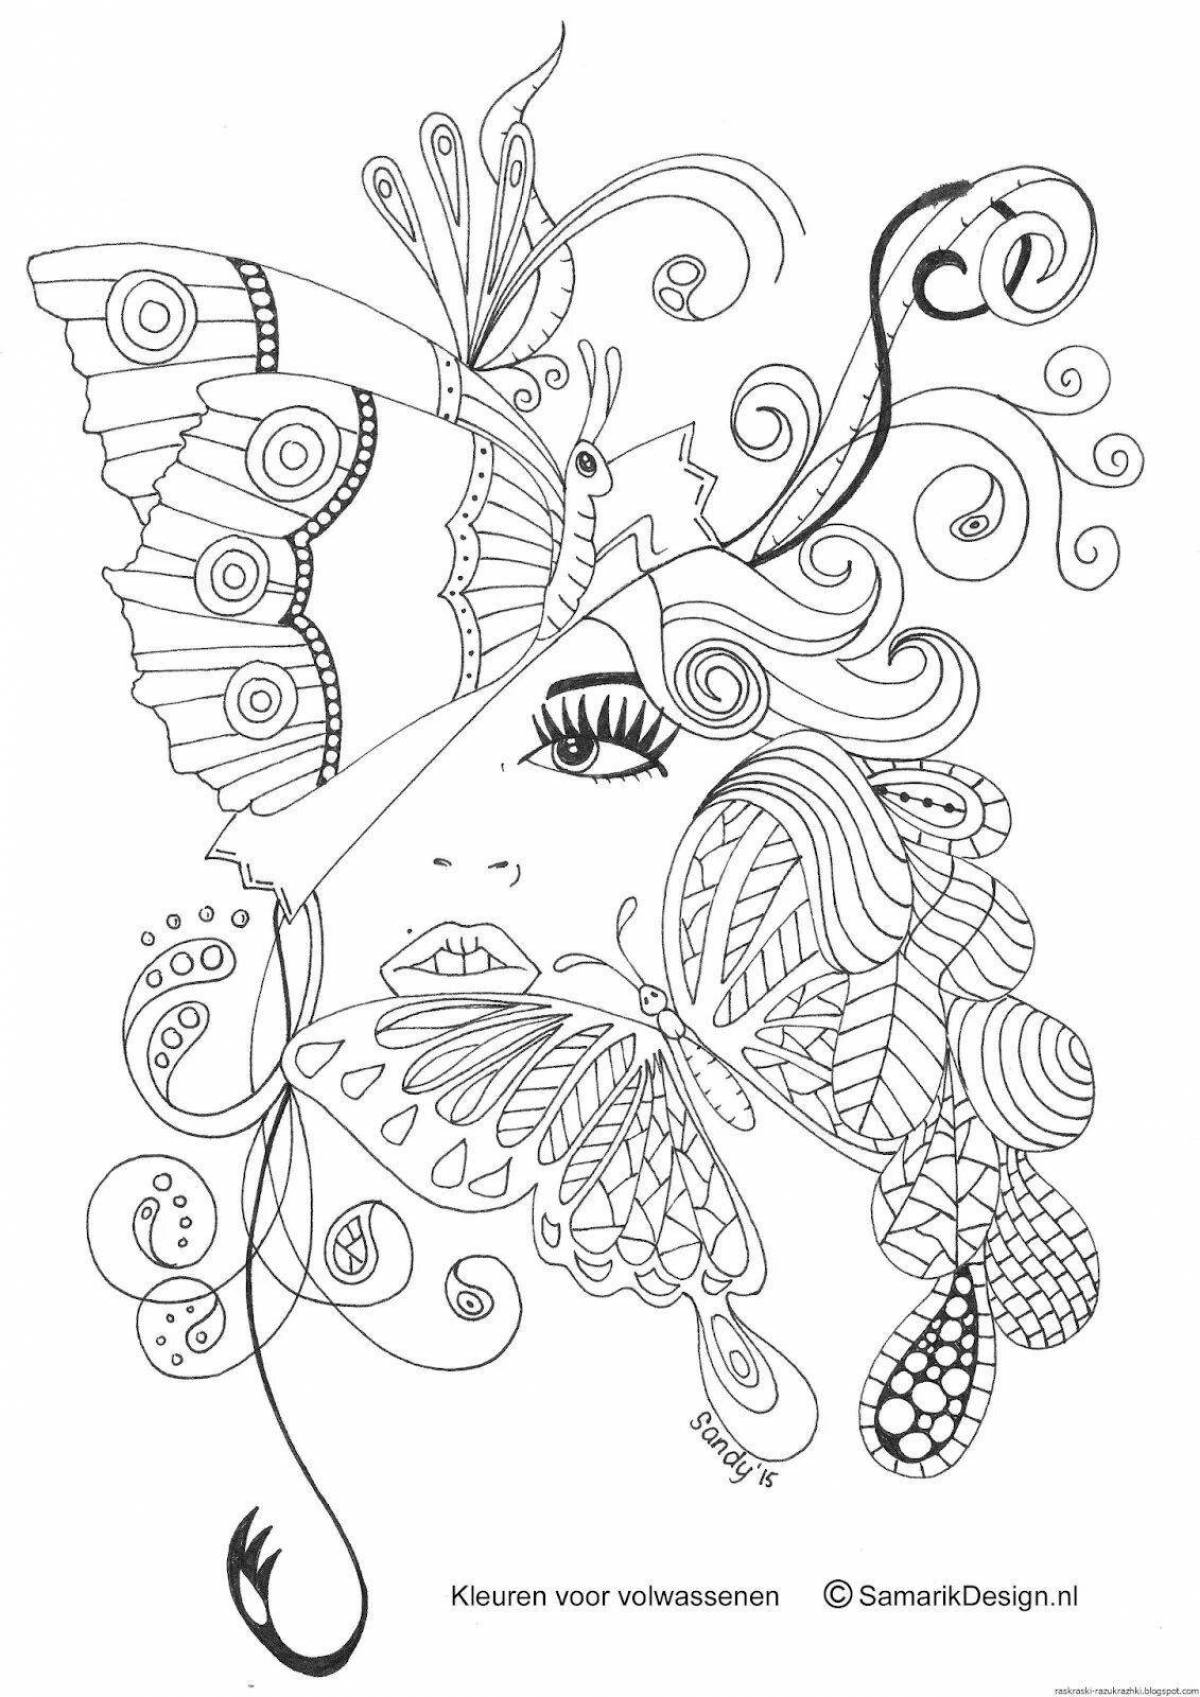 Adorable anti-stress lung coloring book for girls